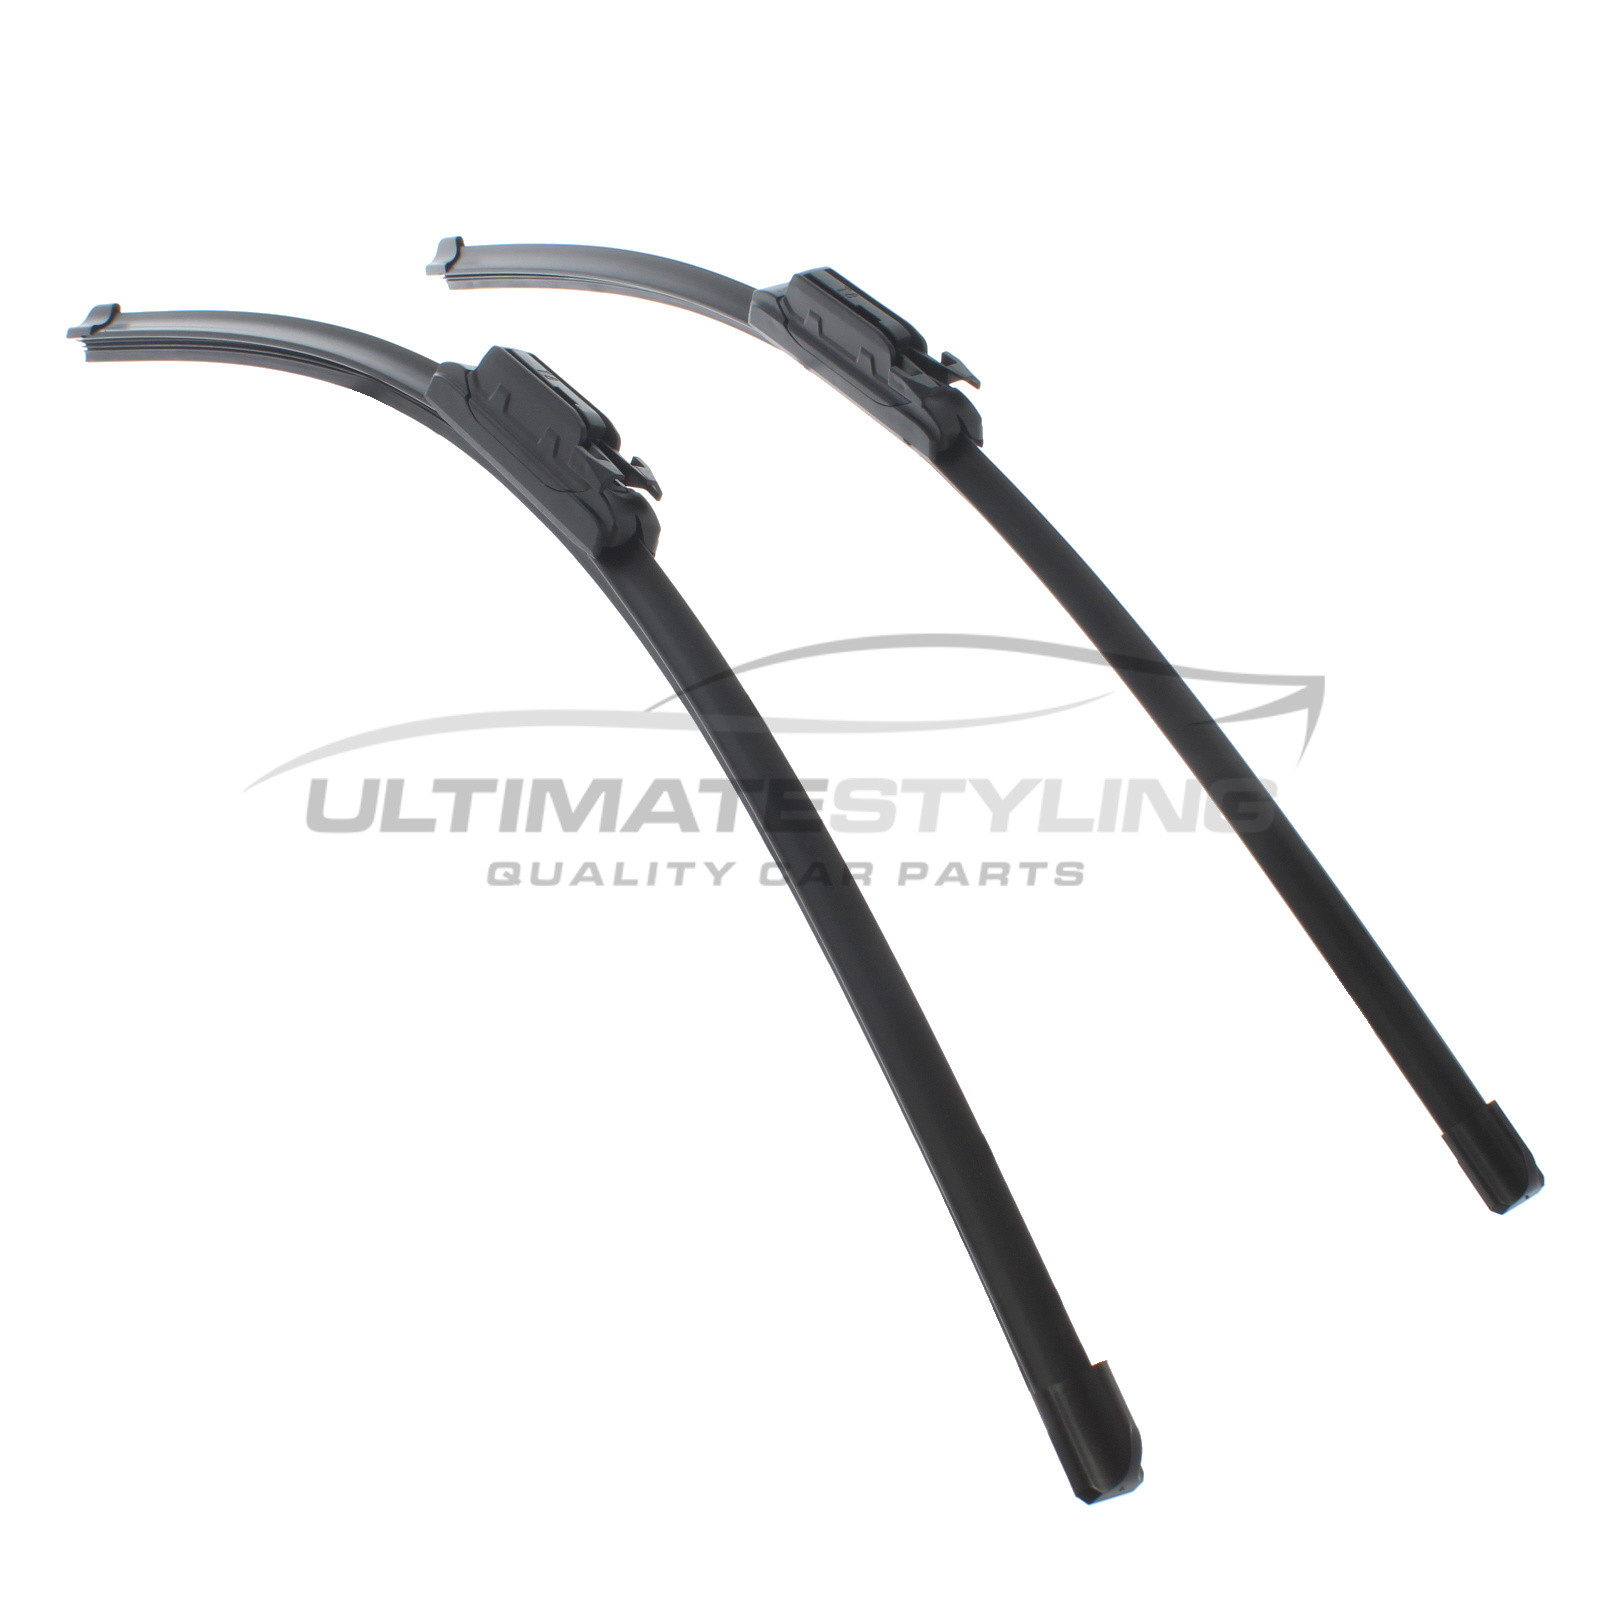 Drivers Side & Passenger Side (Front) Wiper Blades for Seat Altea